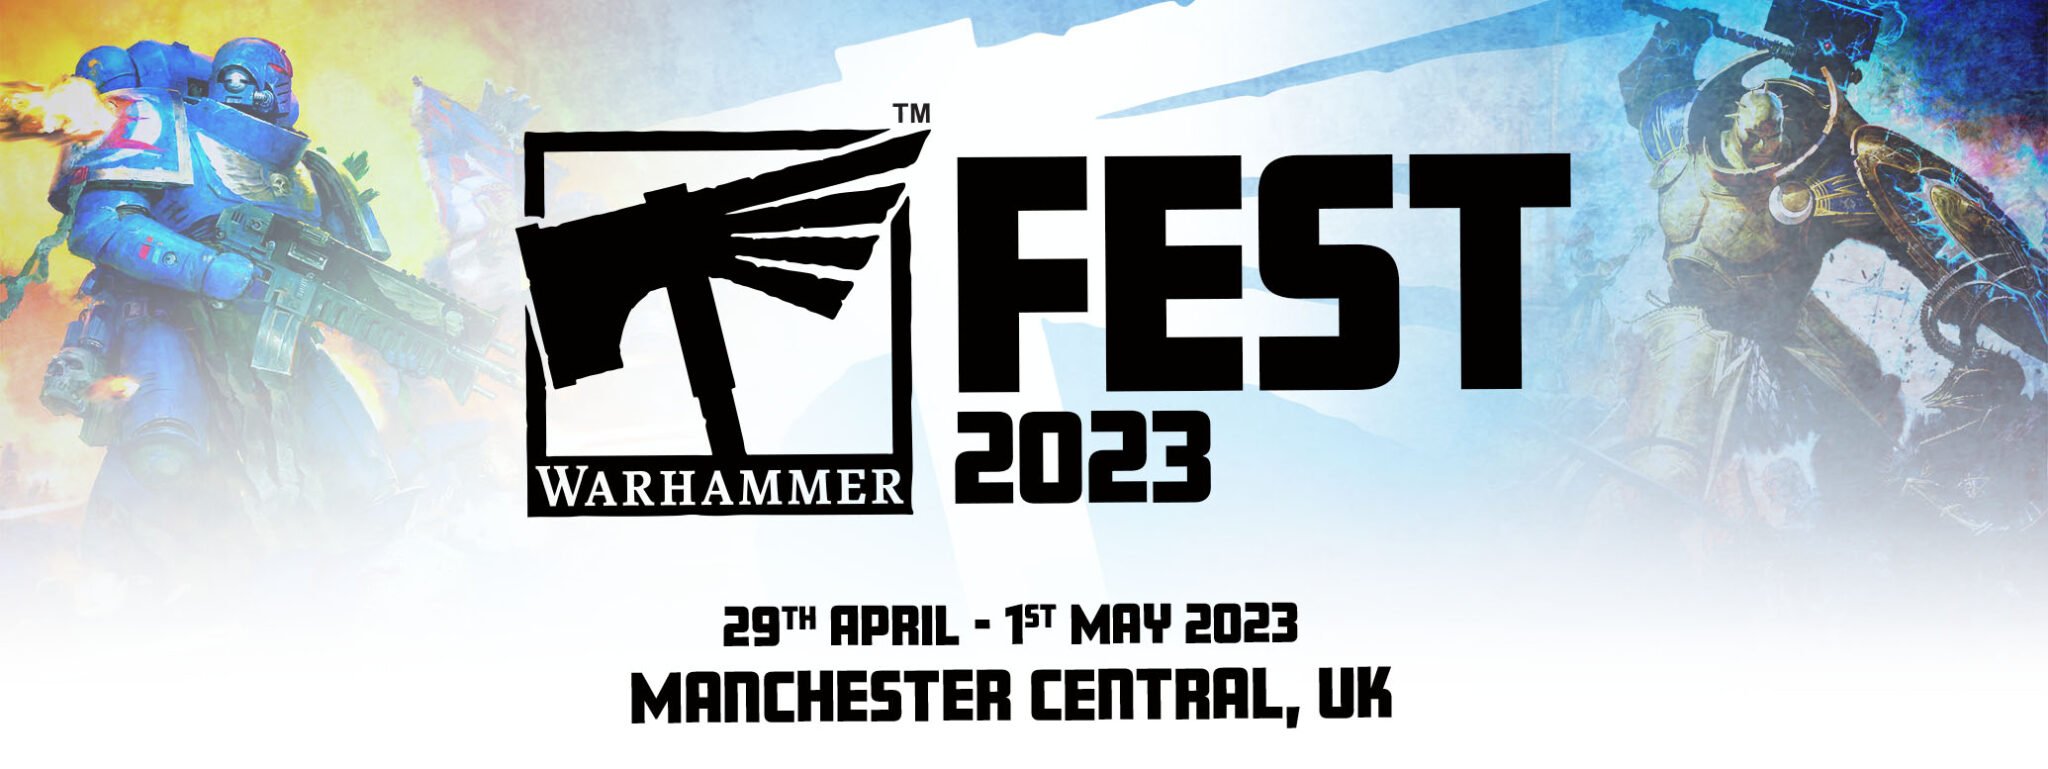 Warhammer Fest 2023 Is Coming and It’s Going To Be the Biggest